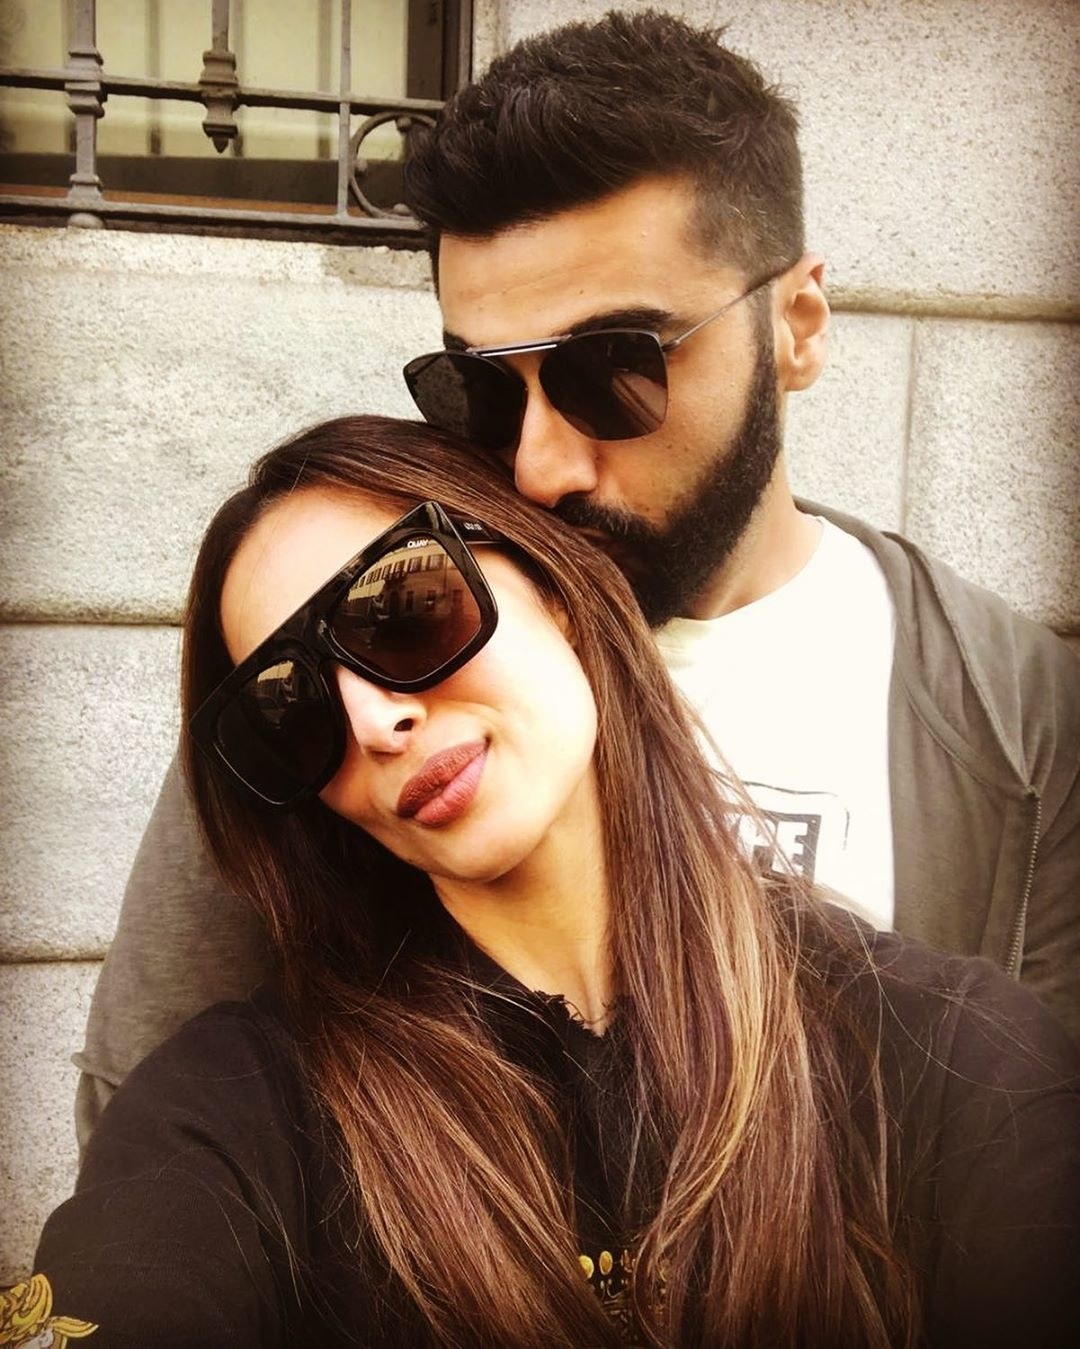 Arjun Kapoor and Malaika Arora: The Unconventional Couple In B-Town 2